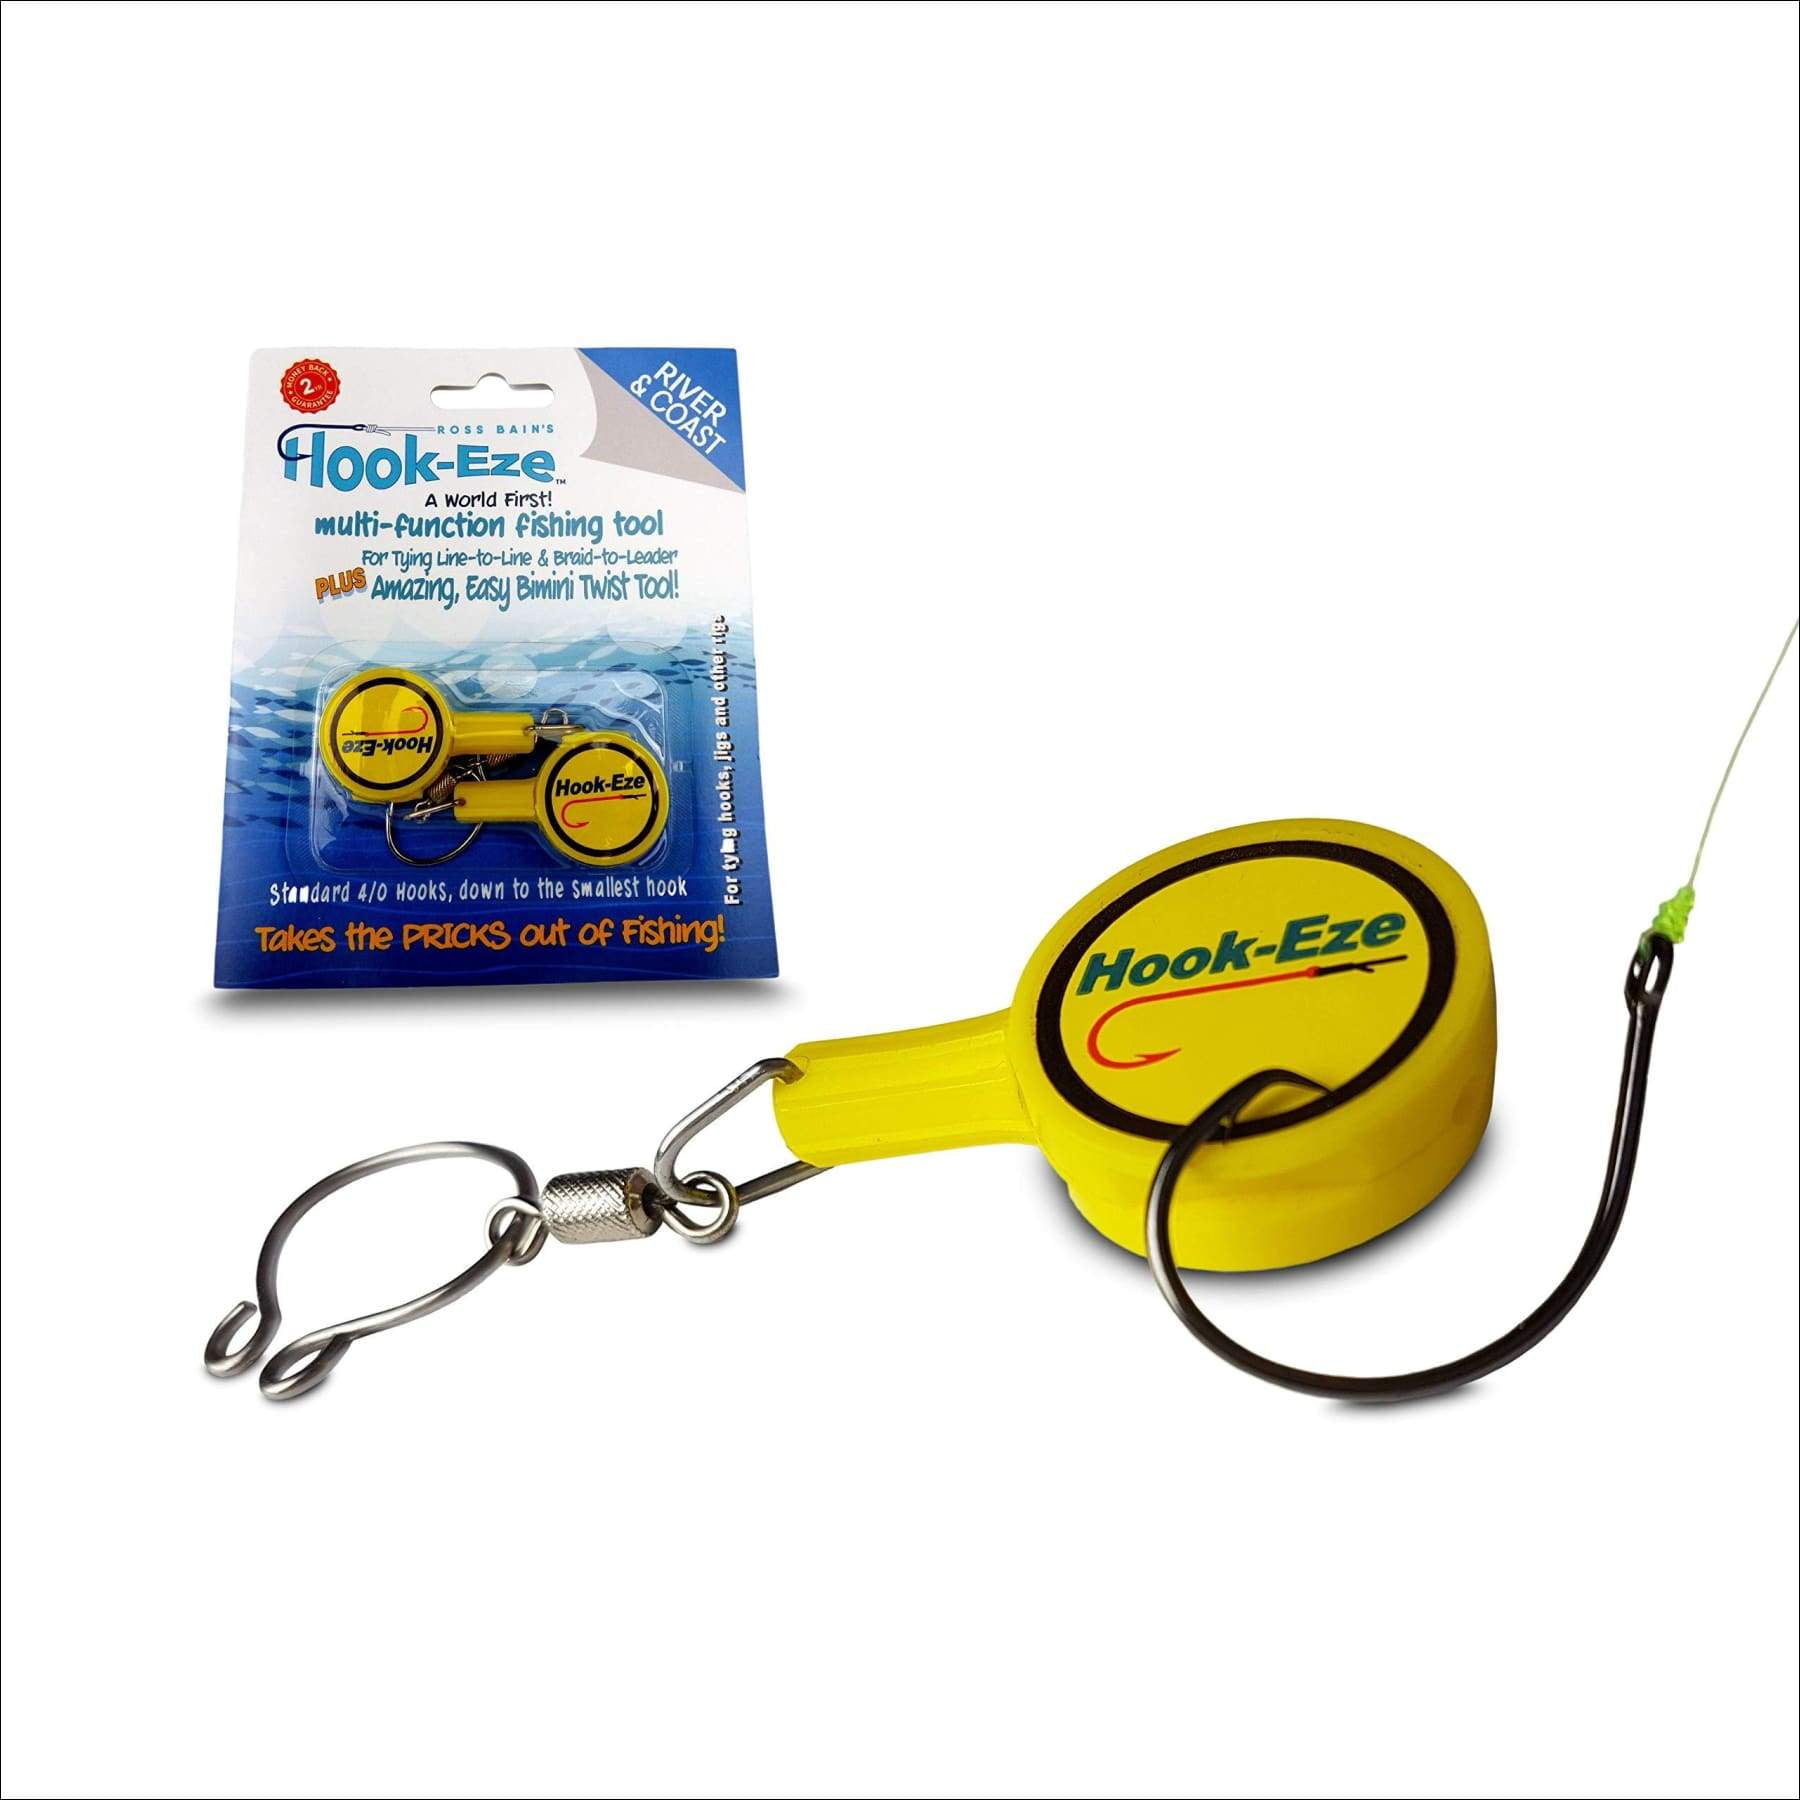 HOOK-EZE Large Fishing Knot Tying Tool All in One | Line Cutter | Cover Hooks on Fishing Poles and Travel Safe